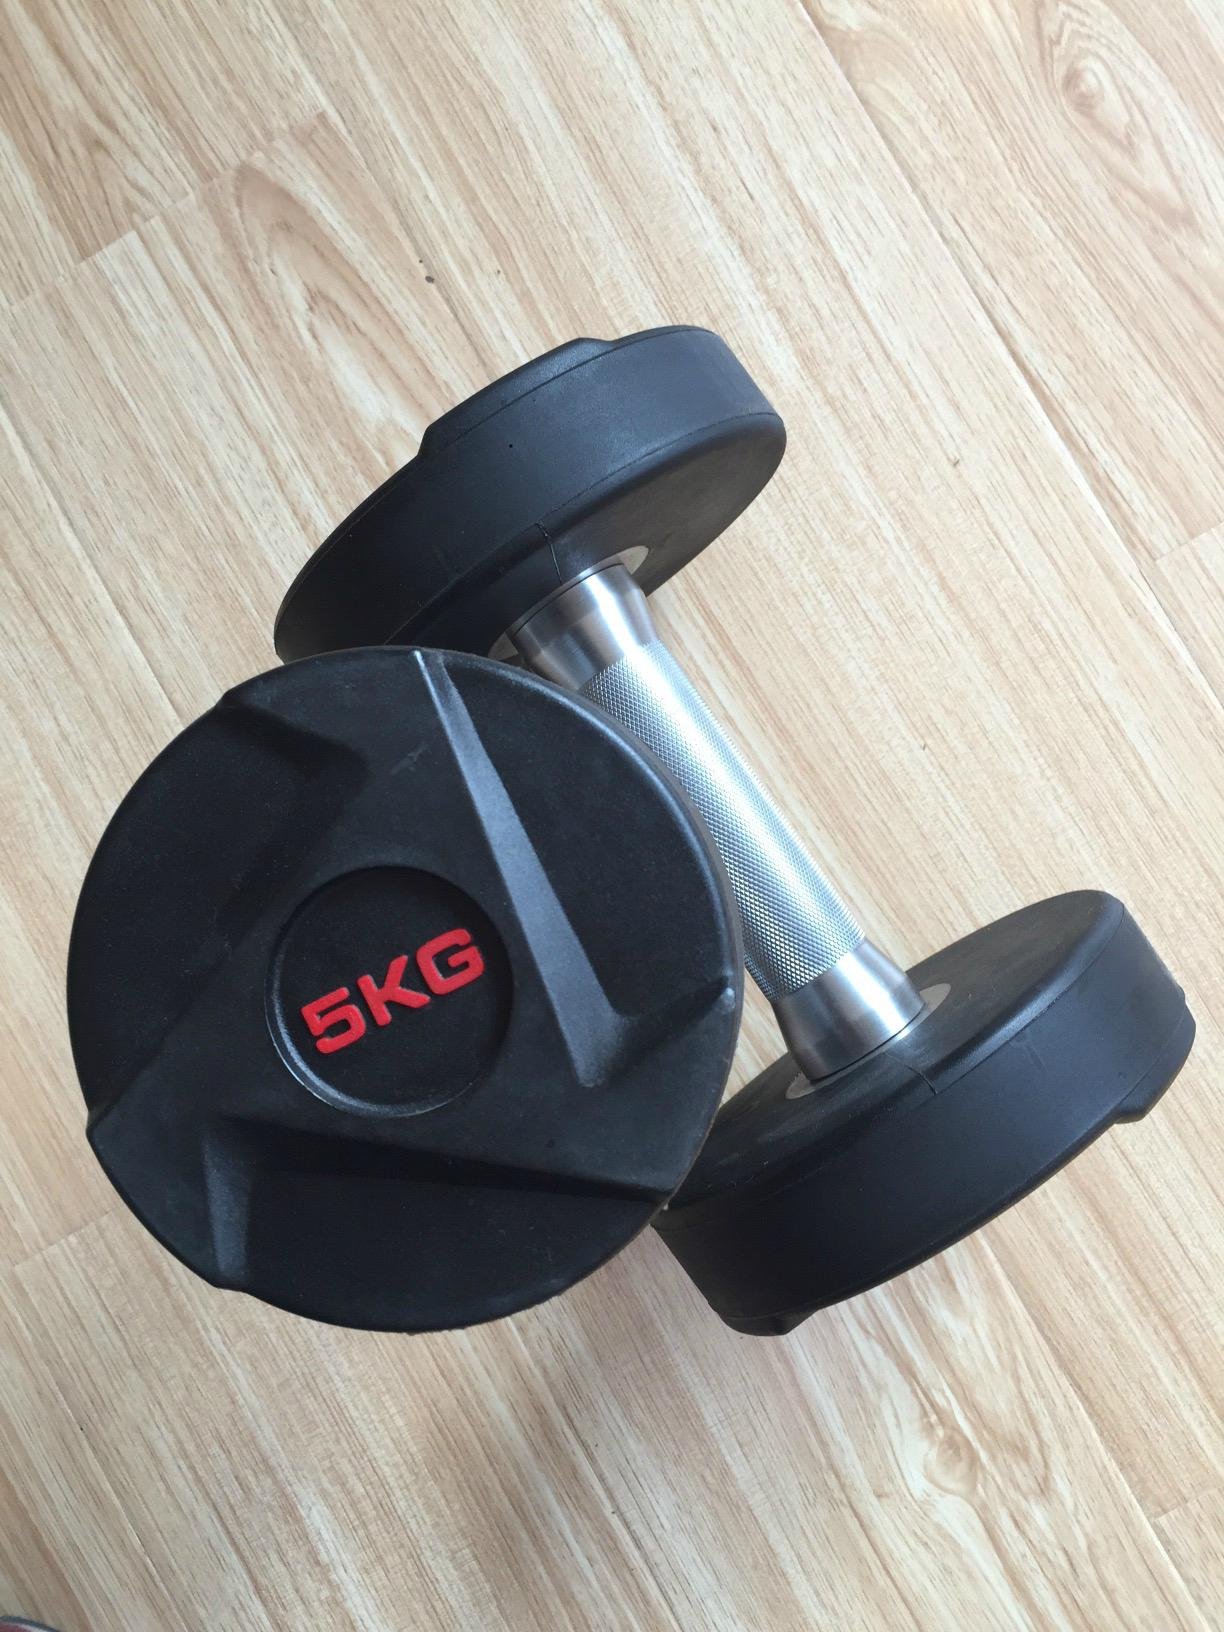 pu dumbbells - KRD-PU007 - kairuida (China Manufacturer) - Body Building -  Sport Products Products - DIYTrade China manufacturers suppliers